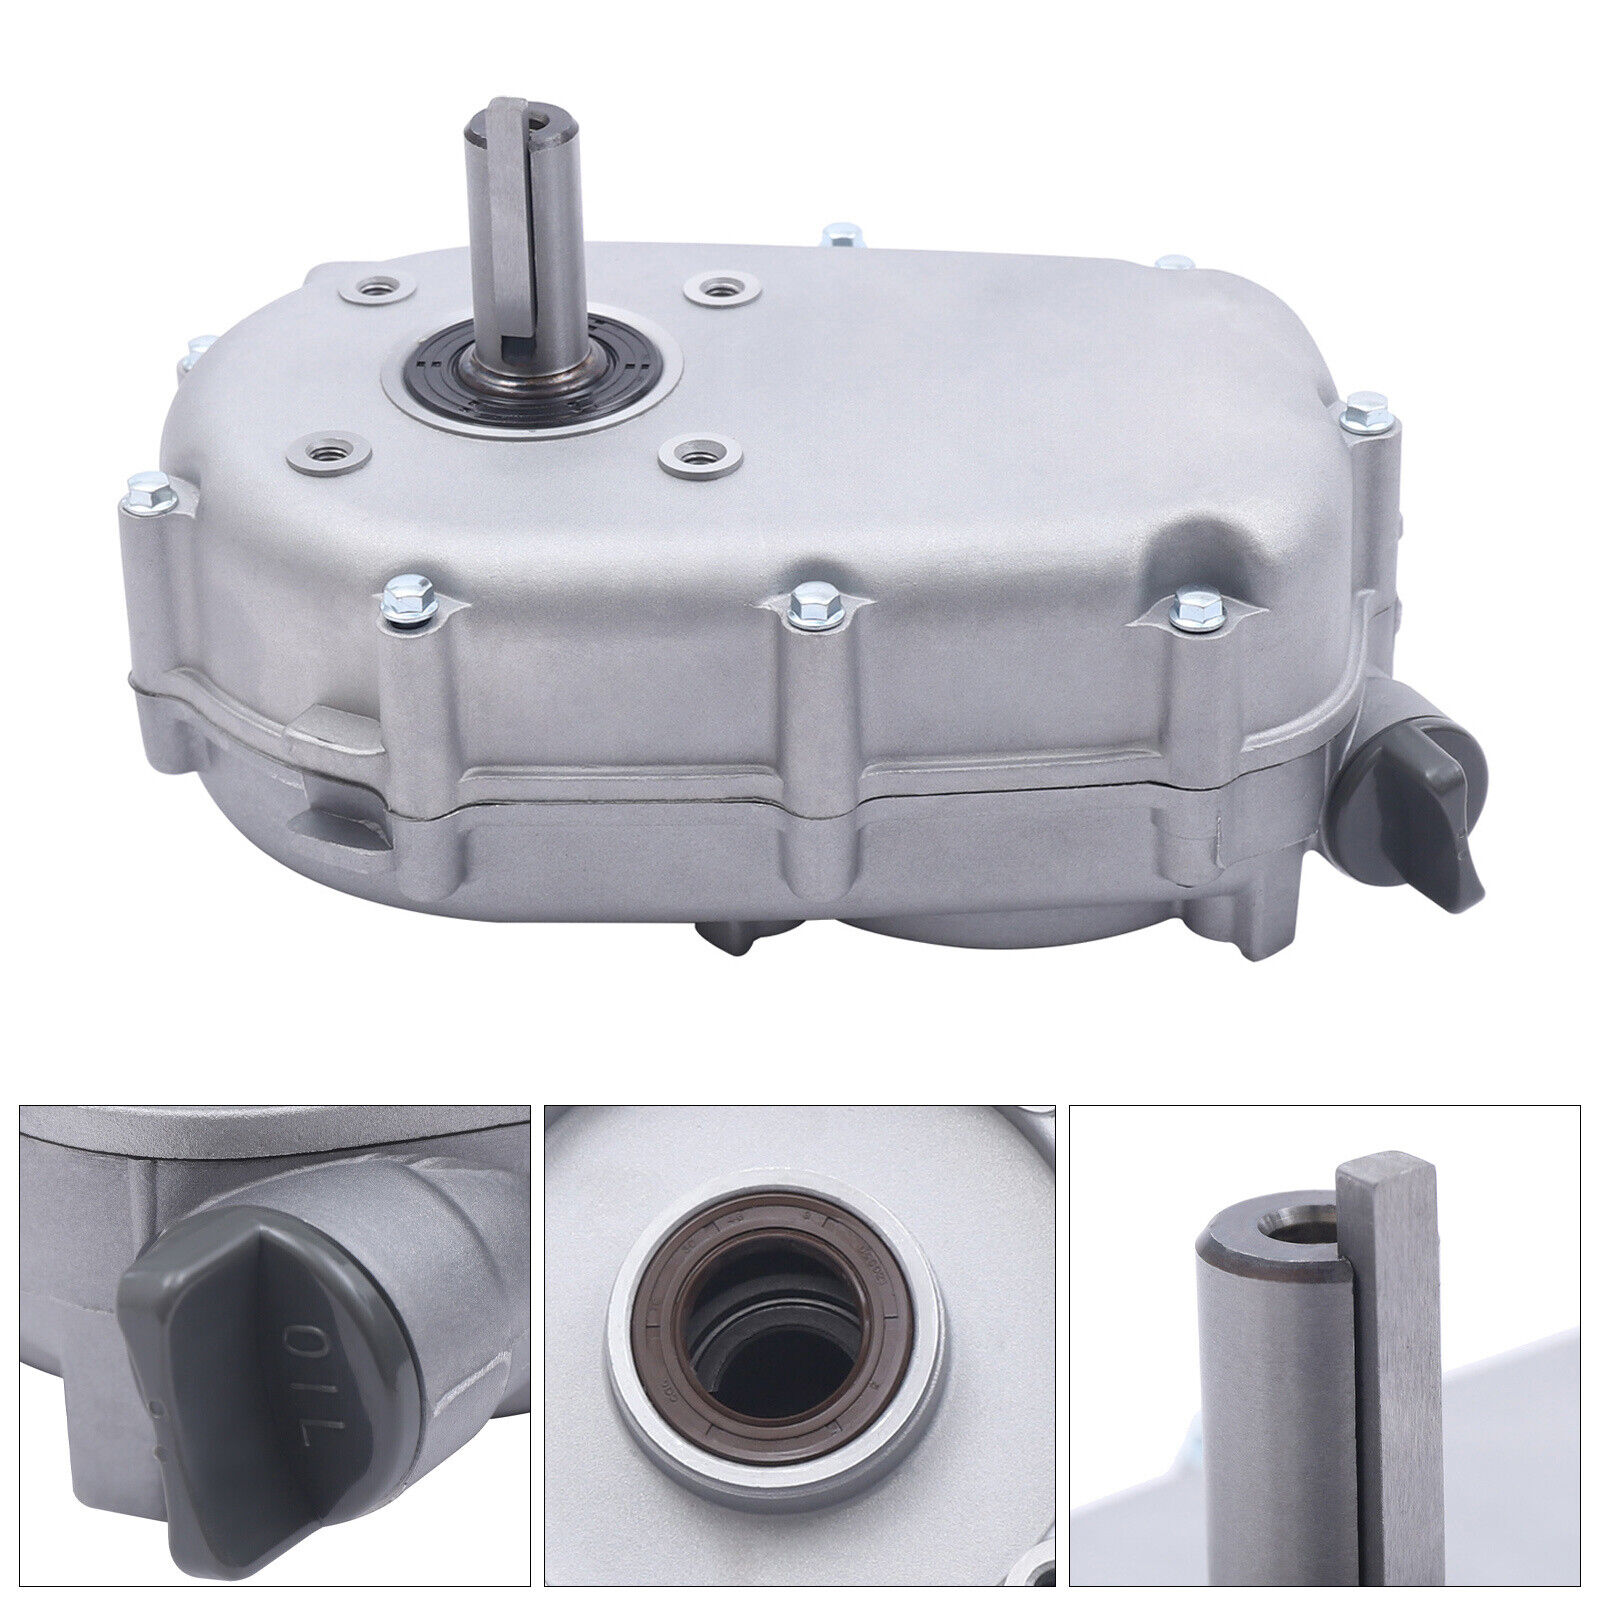  2:1 Ratio Speed Reducer Gear Reduction Box Gearbox Reducer 13HP For Honda GX270